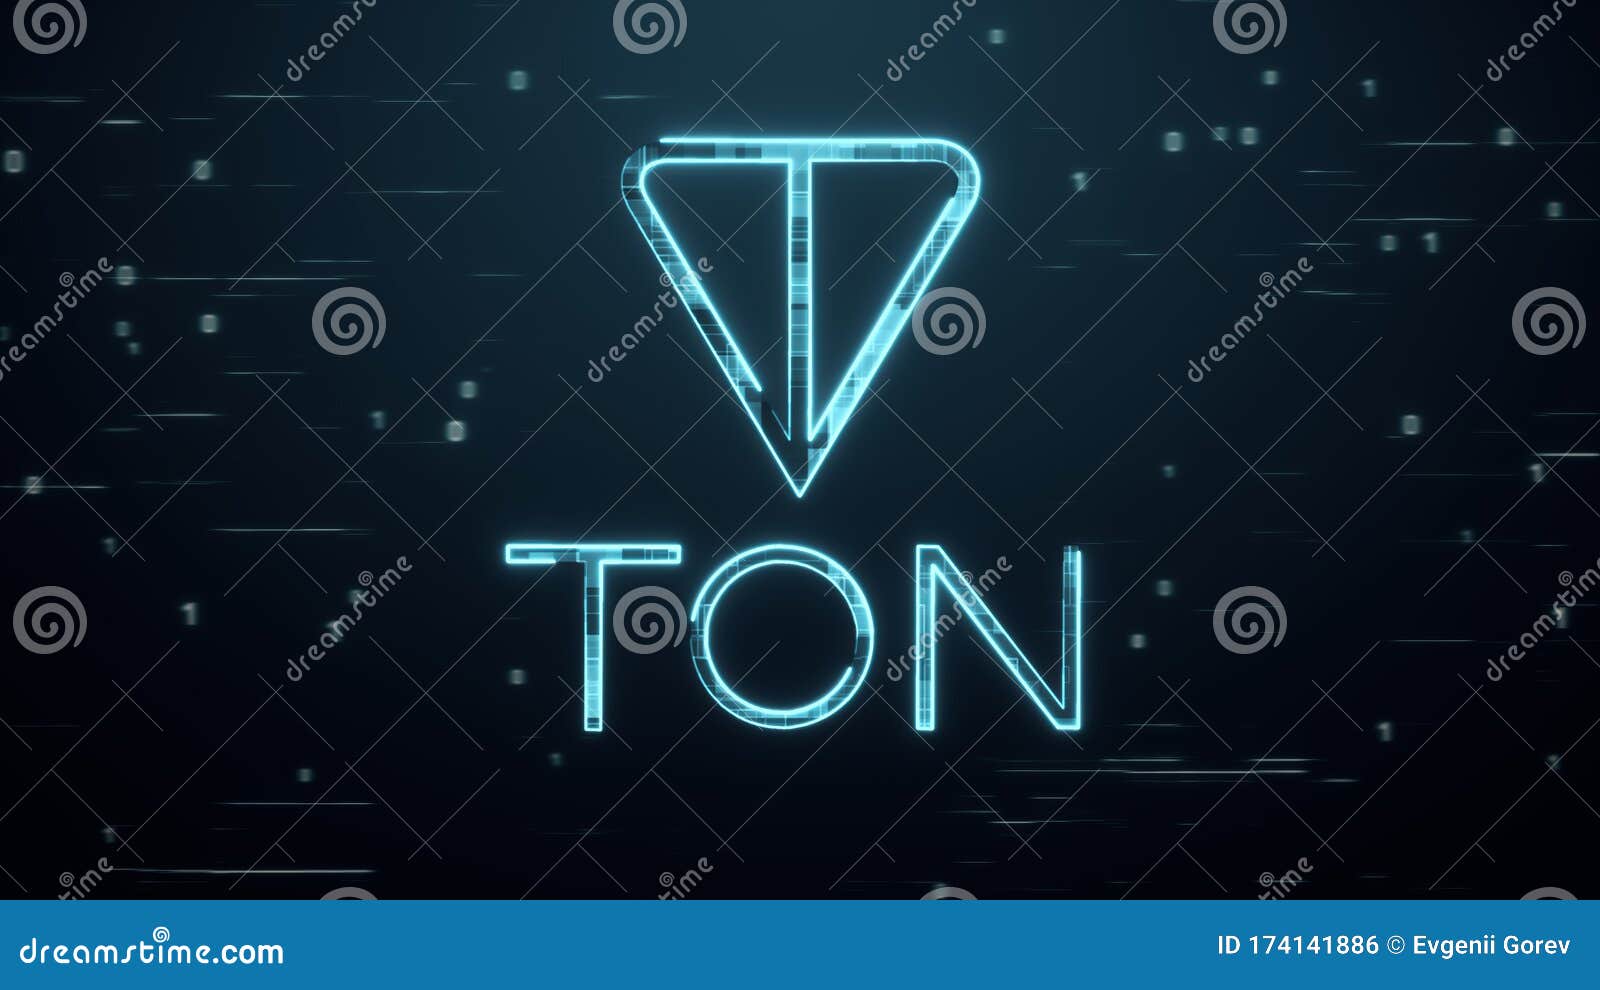 Ton Coin Neon Symbol. Binary Code and Speed Background Stock Illustration - Illustration of finance, 174141886